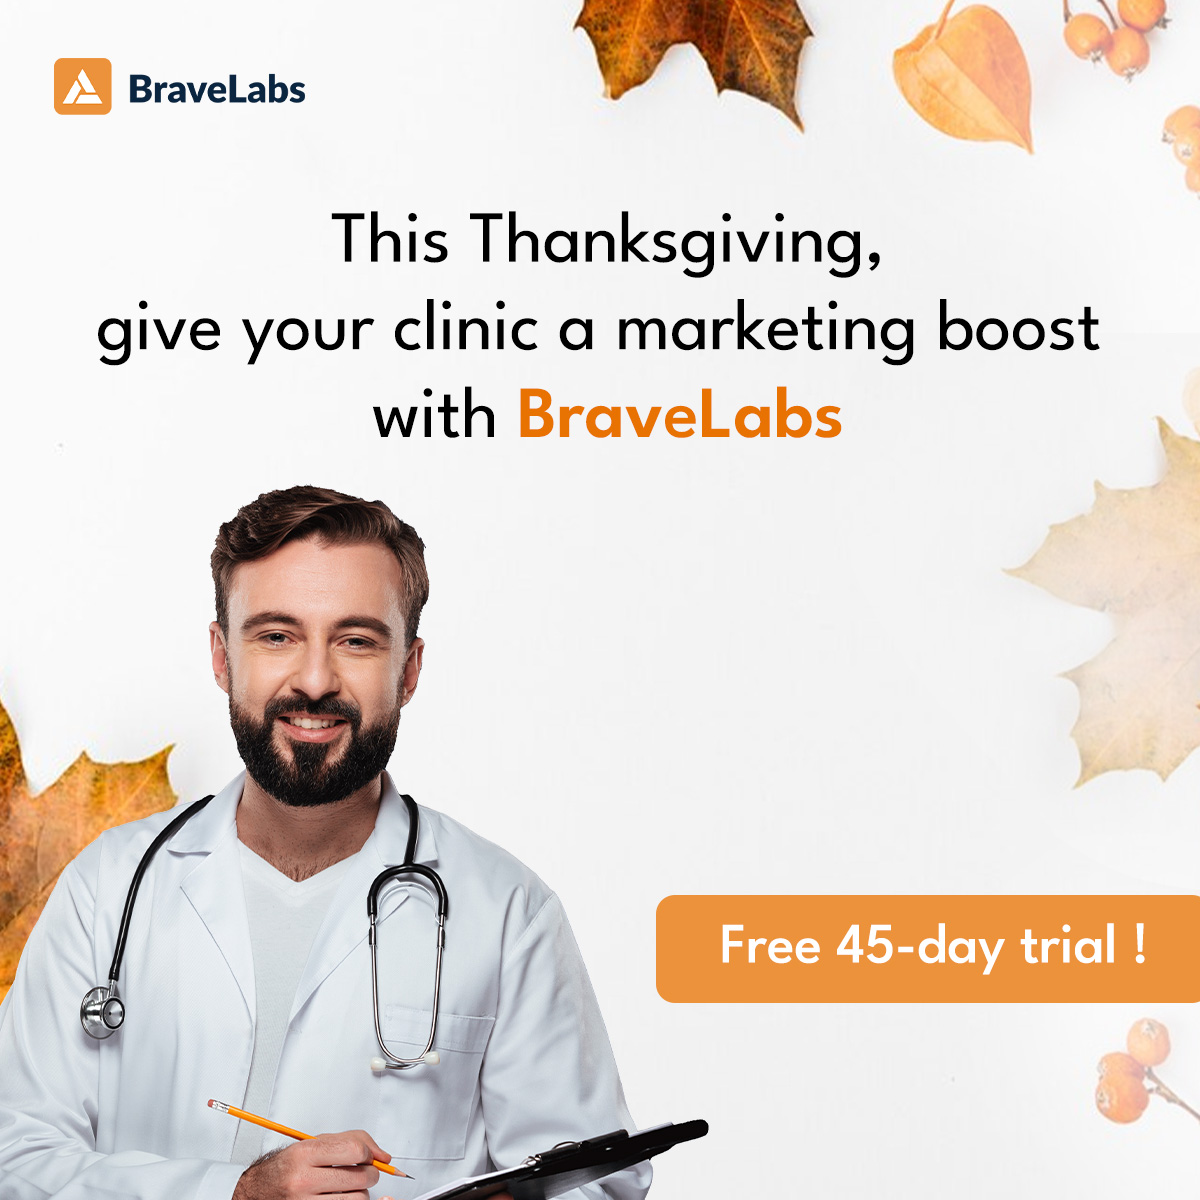 This #Thanksgiving, give your #clinic a #marketing boost with BraveLabs. Transform #patient engagement and clinic visibility now! Get a FREE 45-day trial. campaign.thebravelabs.com/smart-digital-…

#healthcare #hospital #doctor #digitalhealth #digitalmarketingusa #digitalmarketingtips #medical